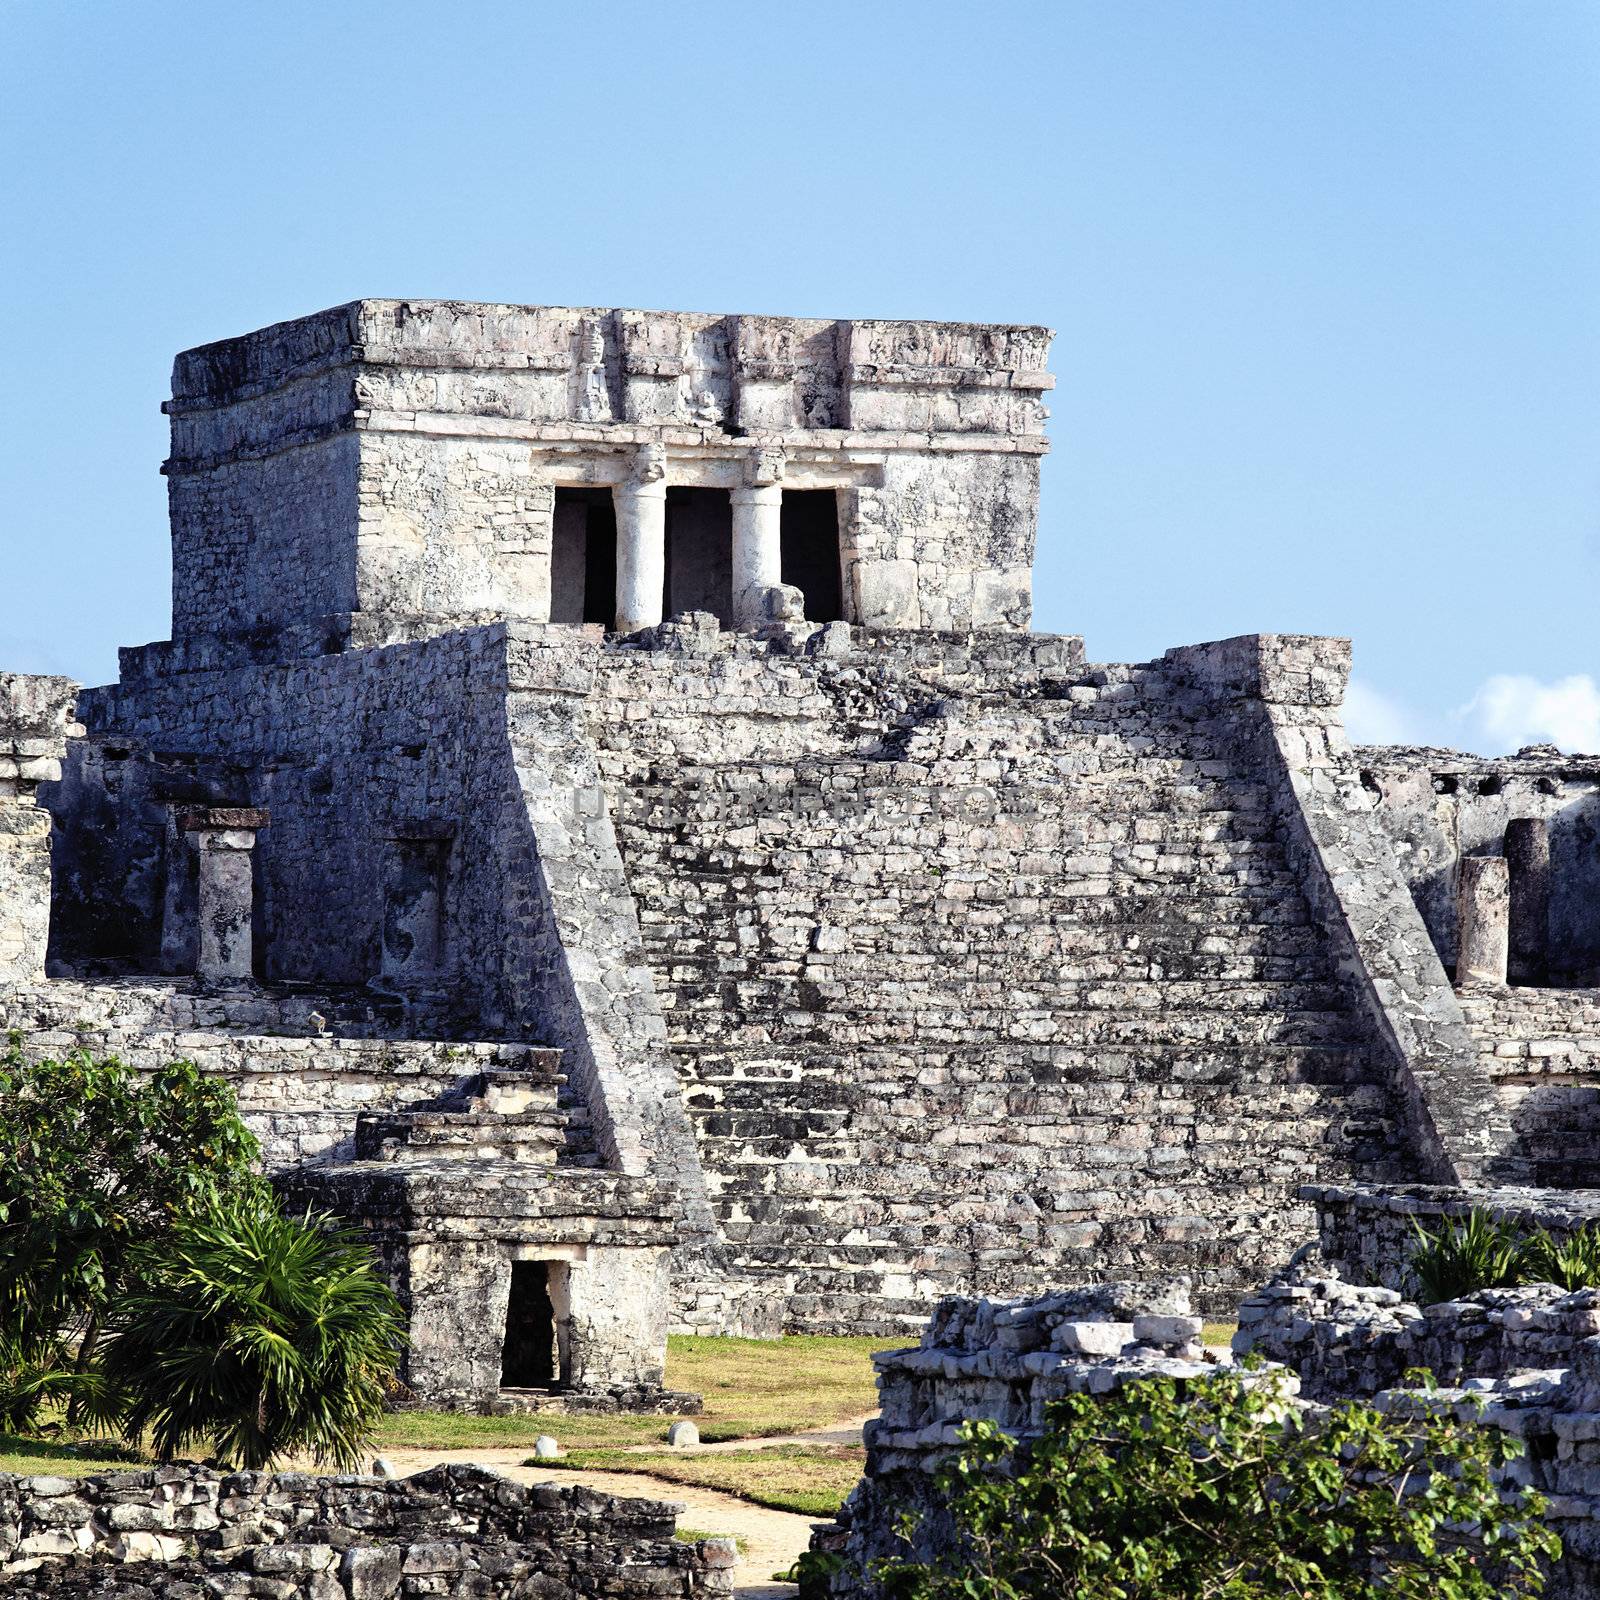 view of famous archaeological ruins of Tulum in Mexico